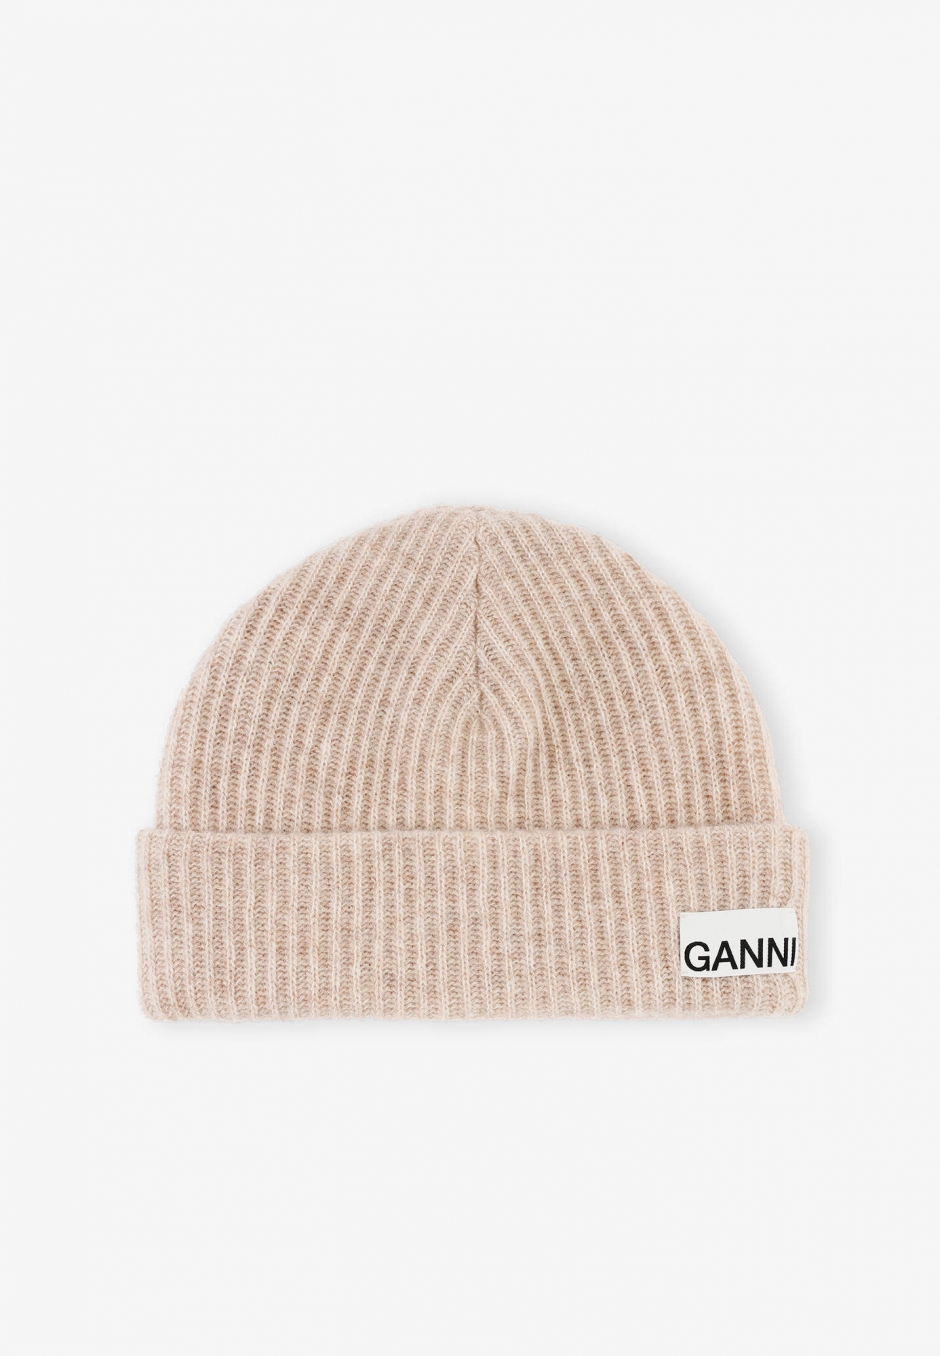 Ganni Recycled Wool Knit Hat